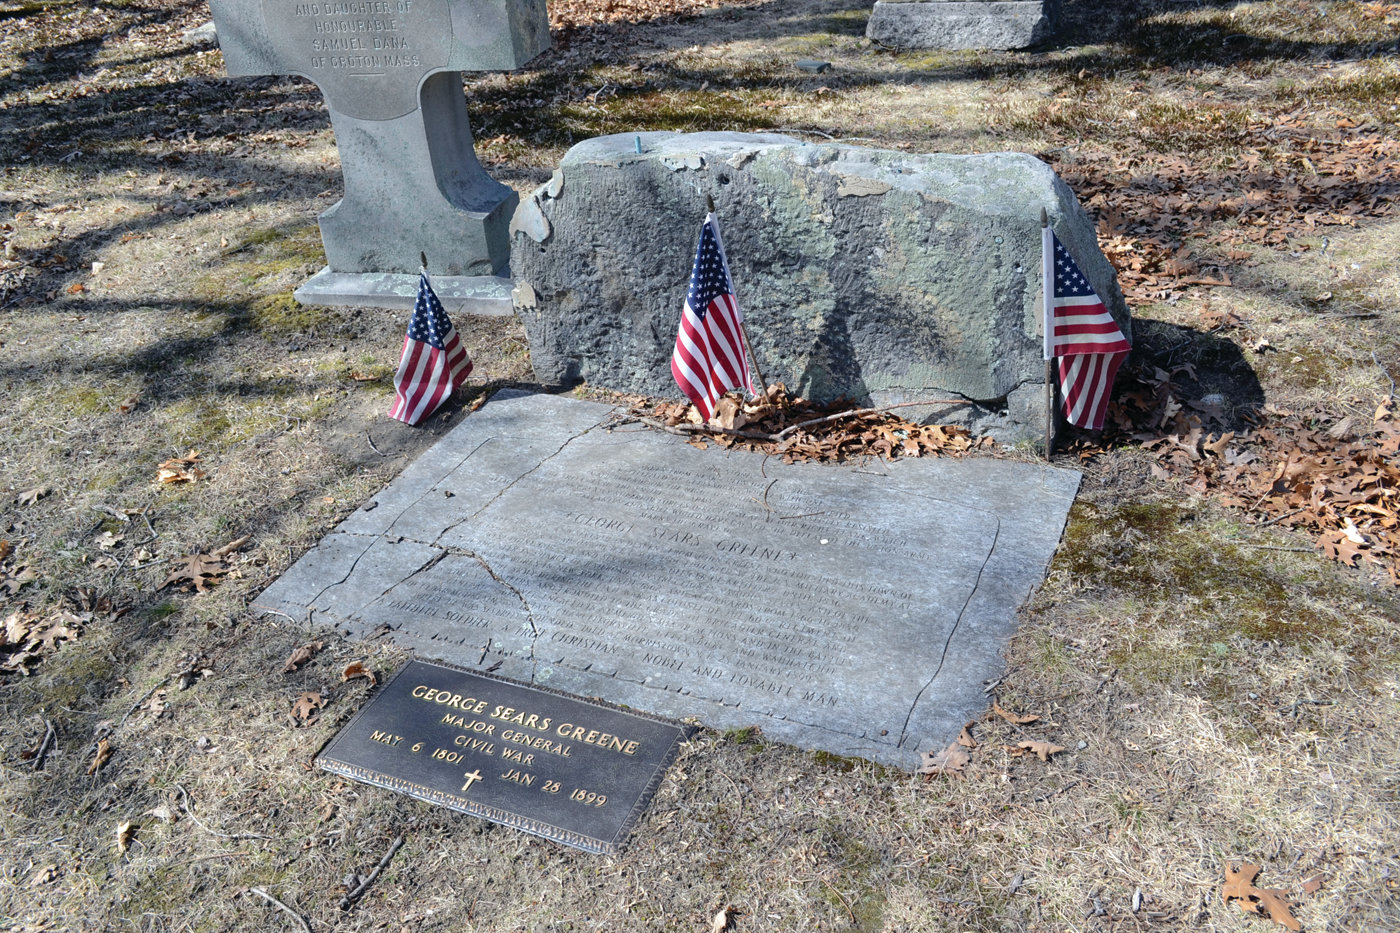 HERE LIES GENERAL GREENE: The damaged capstone to General Greene’s grave is actually a replica. The original is encased in a display at City Hall – thankfully, too, as the replica was damaged by vandals about 10 years ago. The headstone is a boulder taken from the Gettysburg battlefield. 